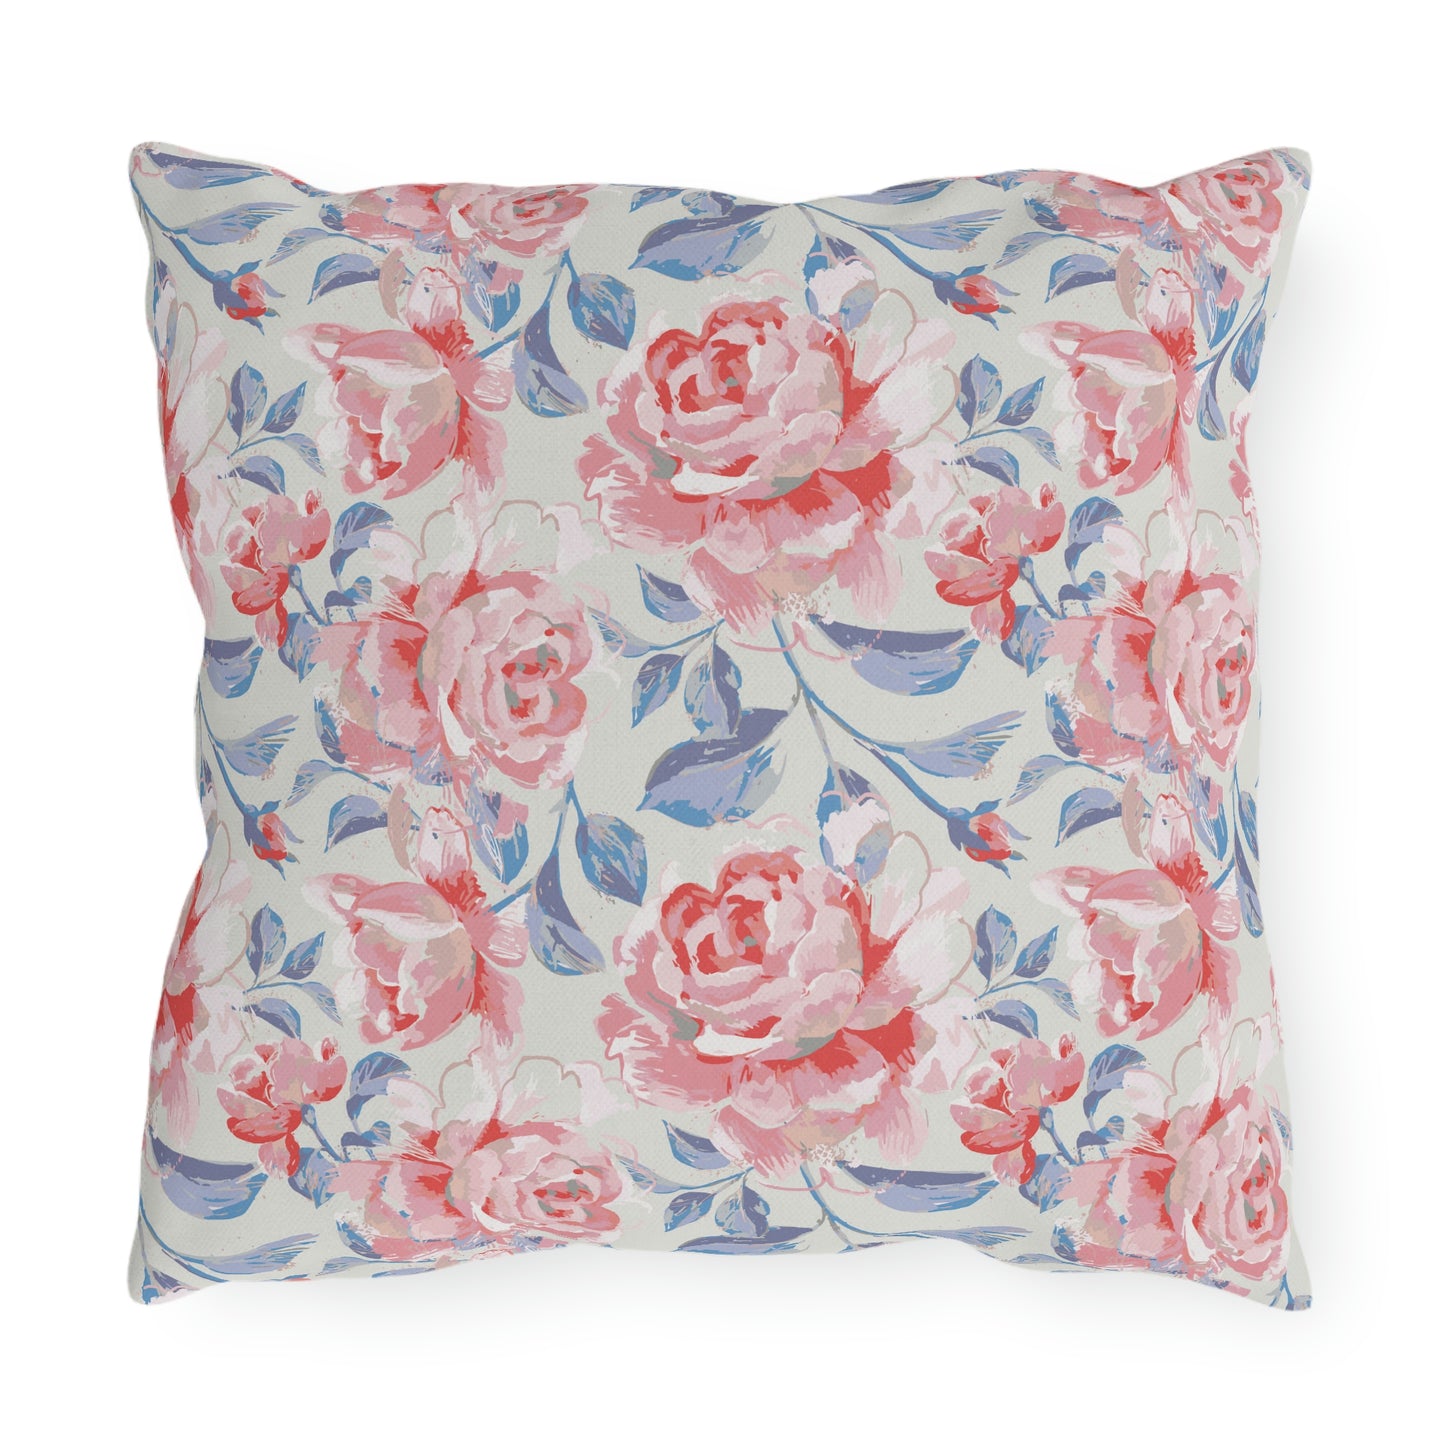 Pink Roses Outdoor Pillow